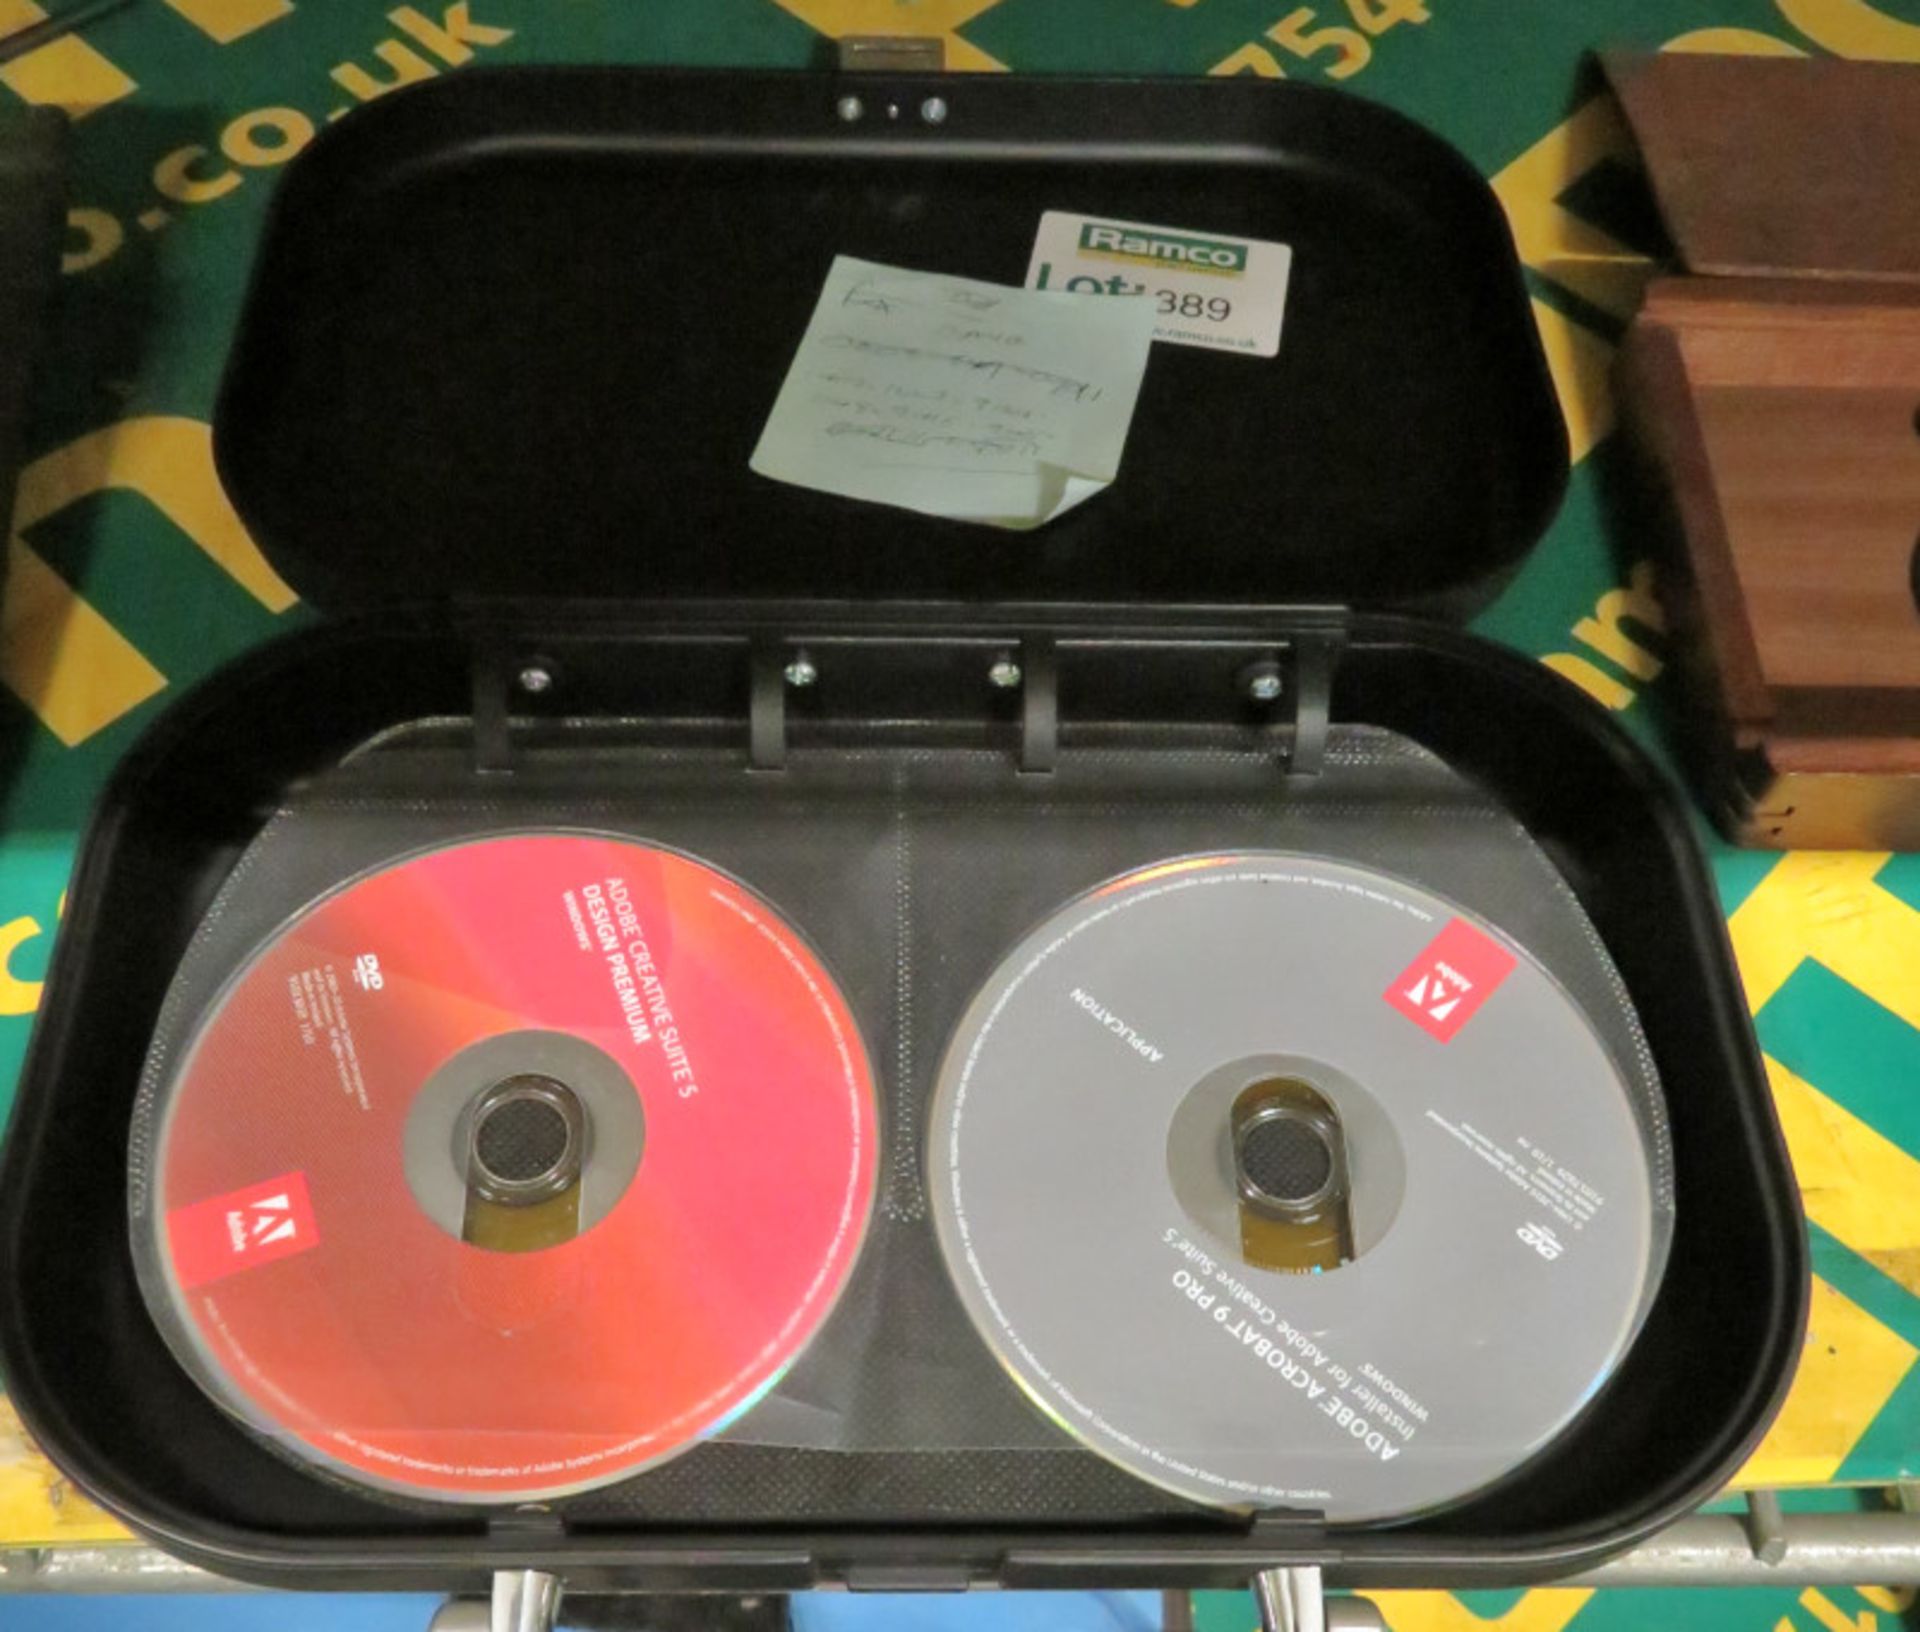 CD Case with Adobe Software Discs